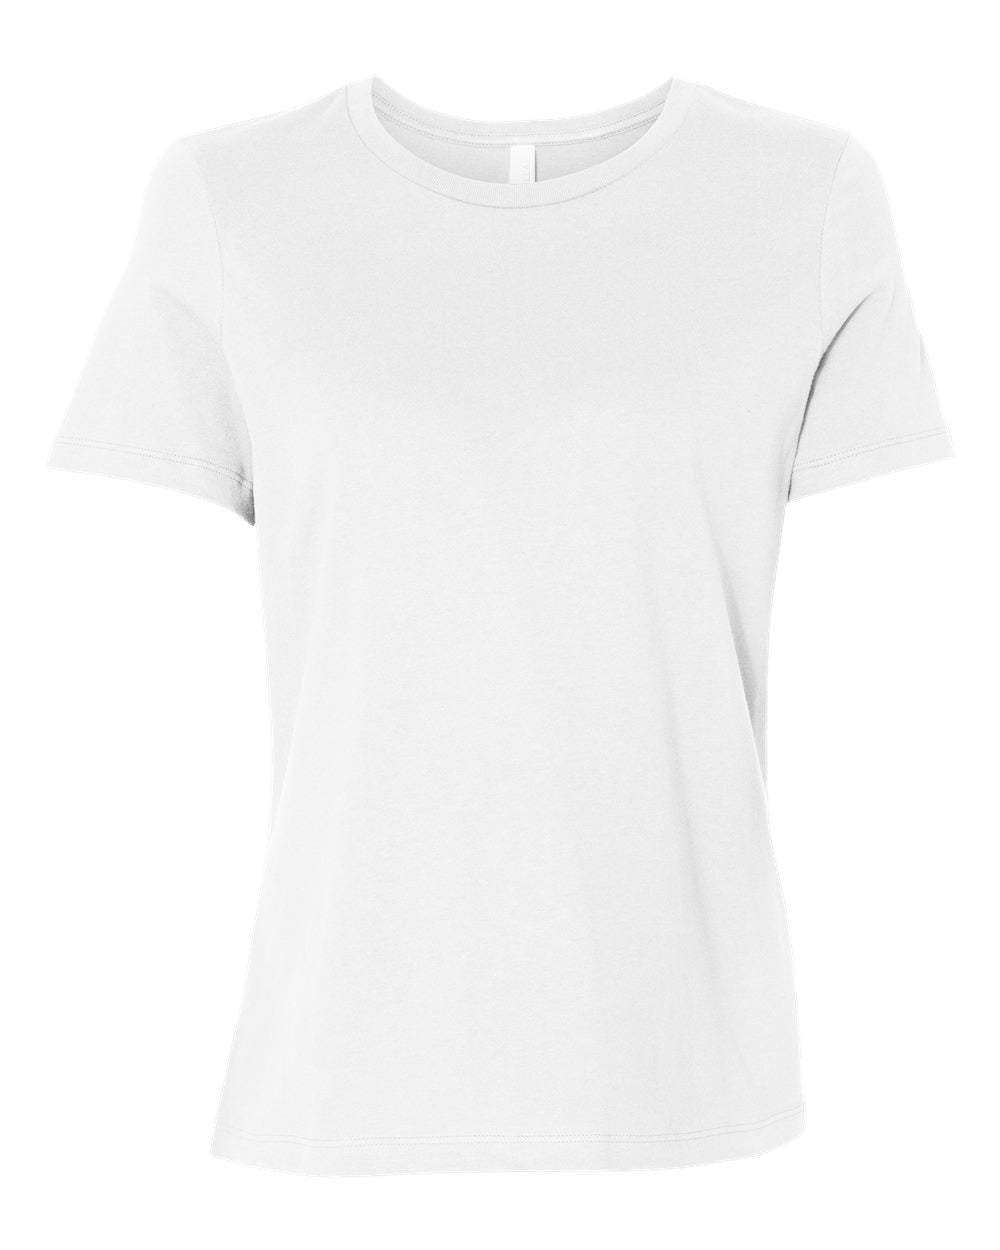 Pretreated BELLA+CANVAS 6400 Women's Relaxed Jersey Tee